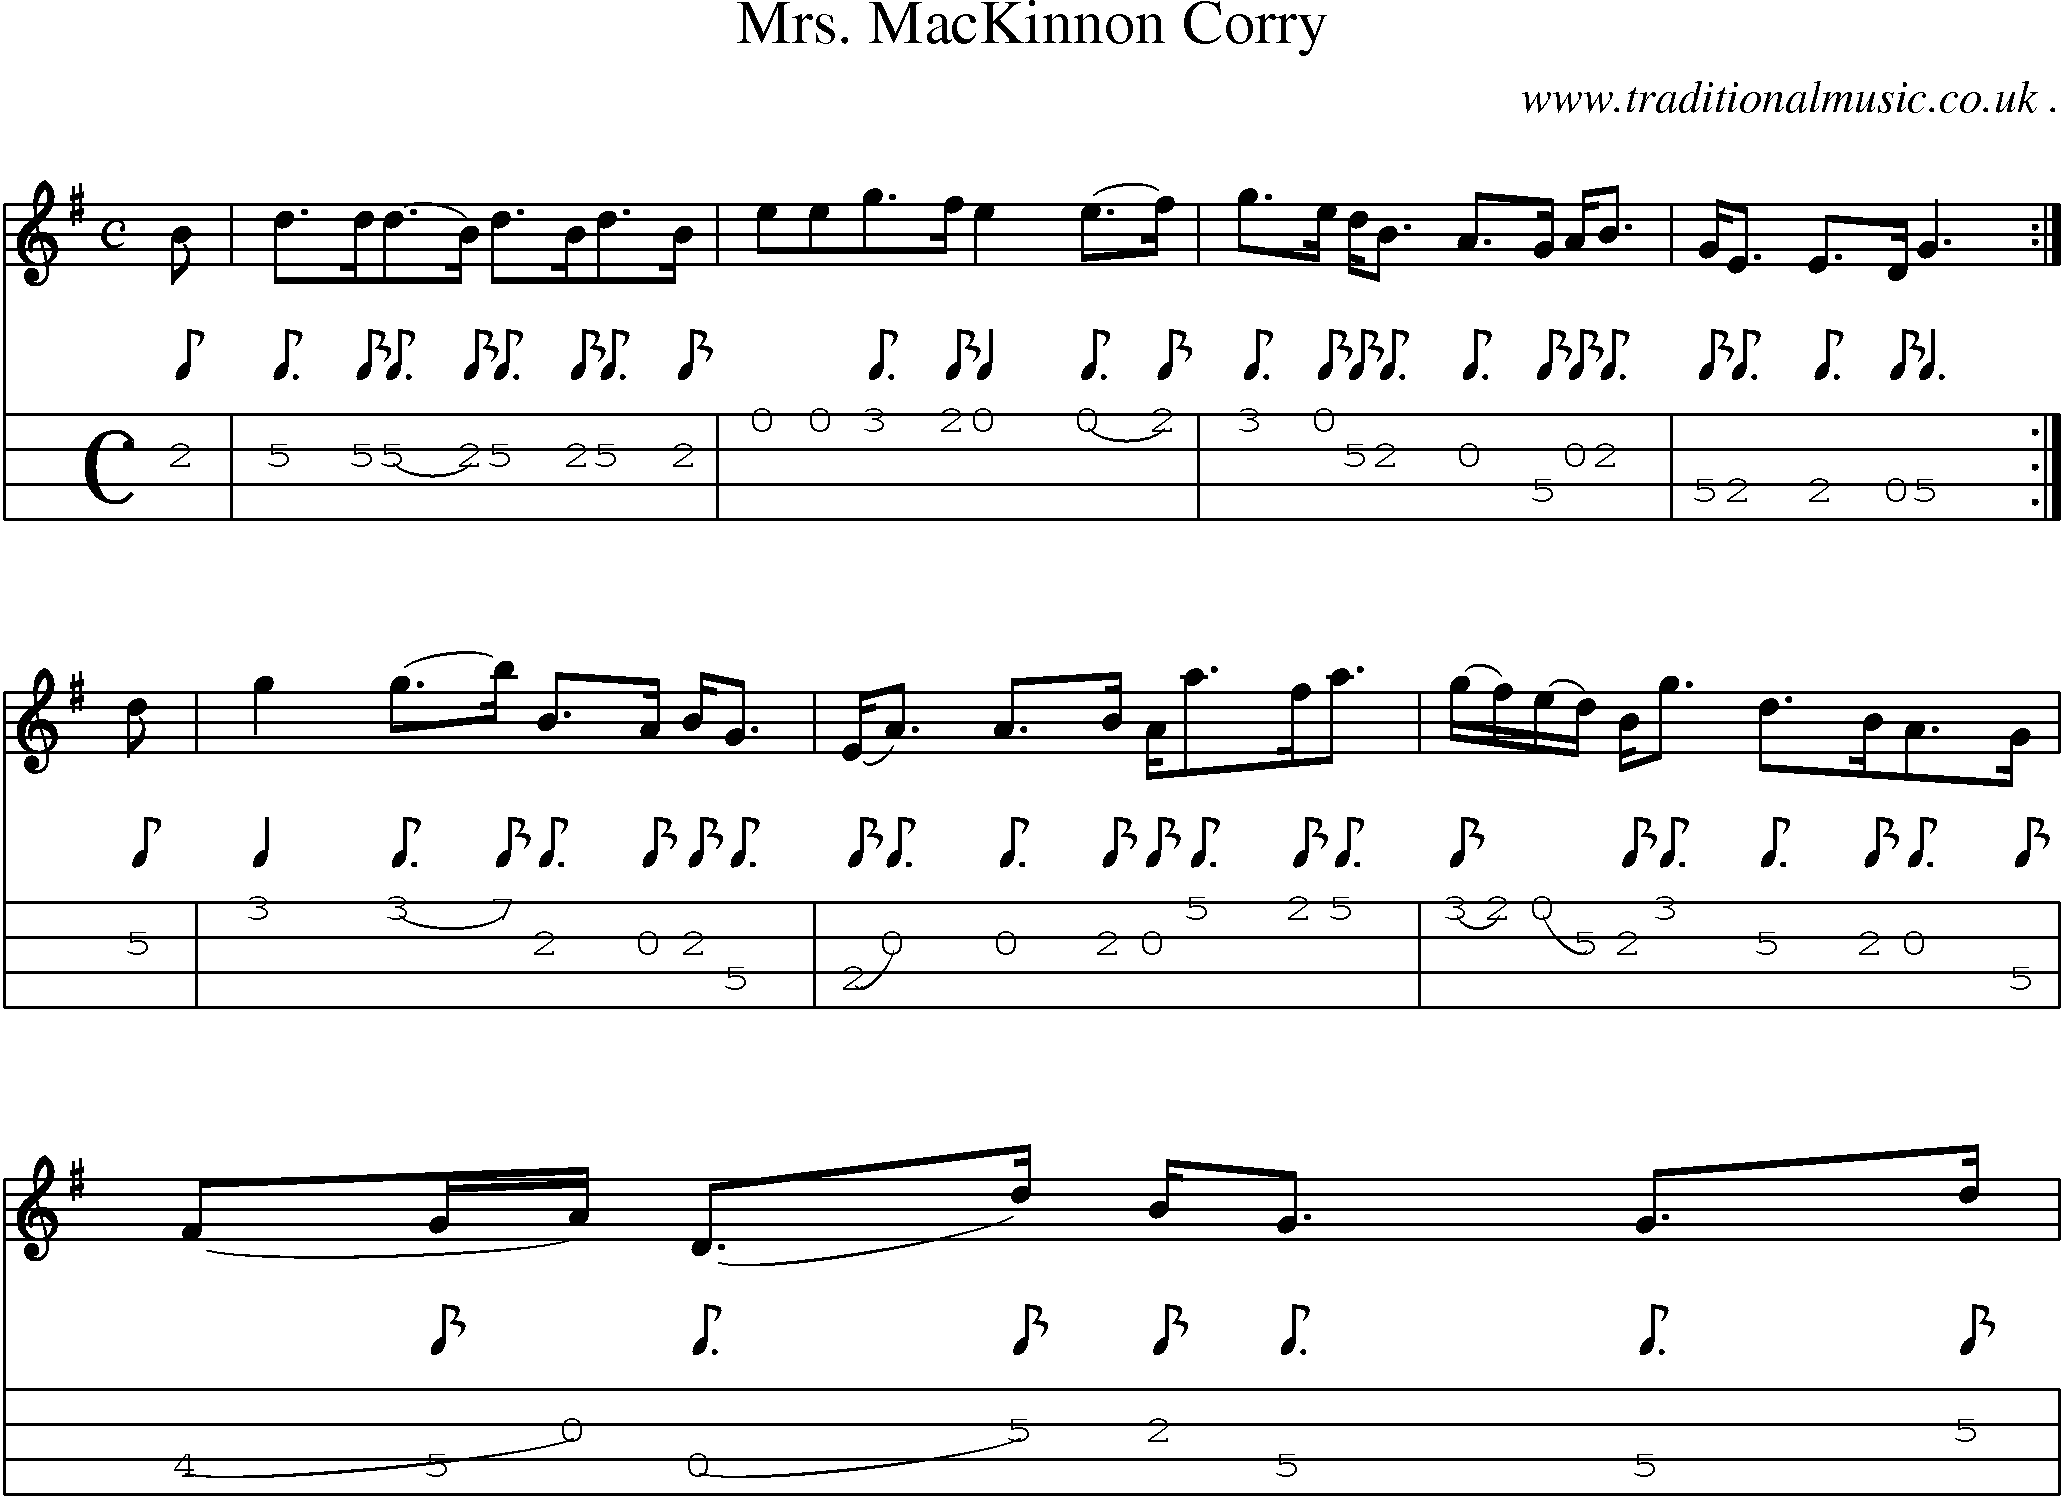 Sheet-music  score, Chords and Mandolin Tabs for Mrs Mackinnon Corry